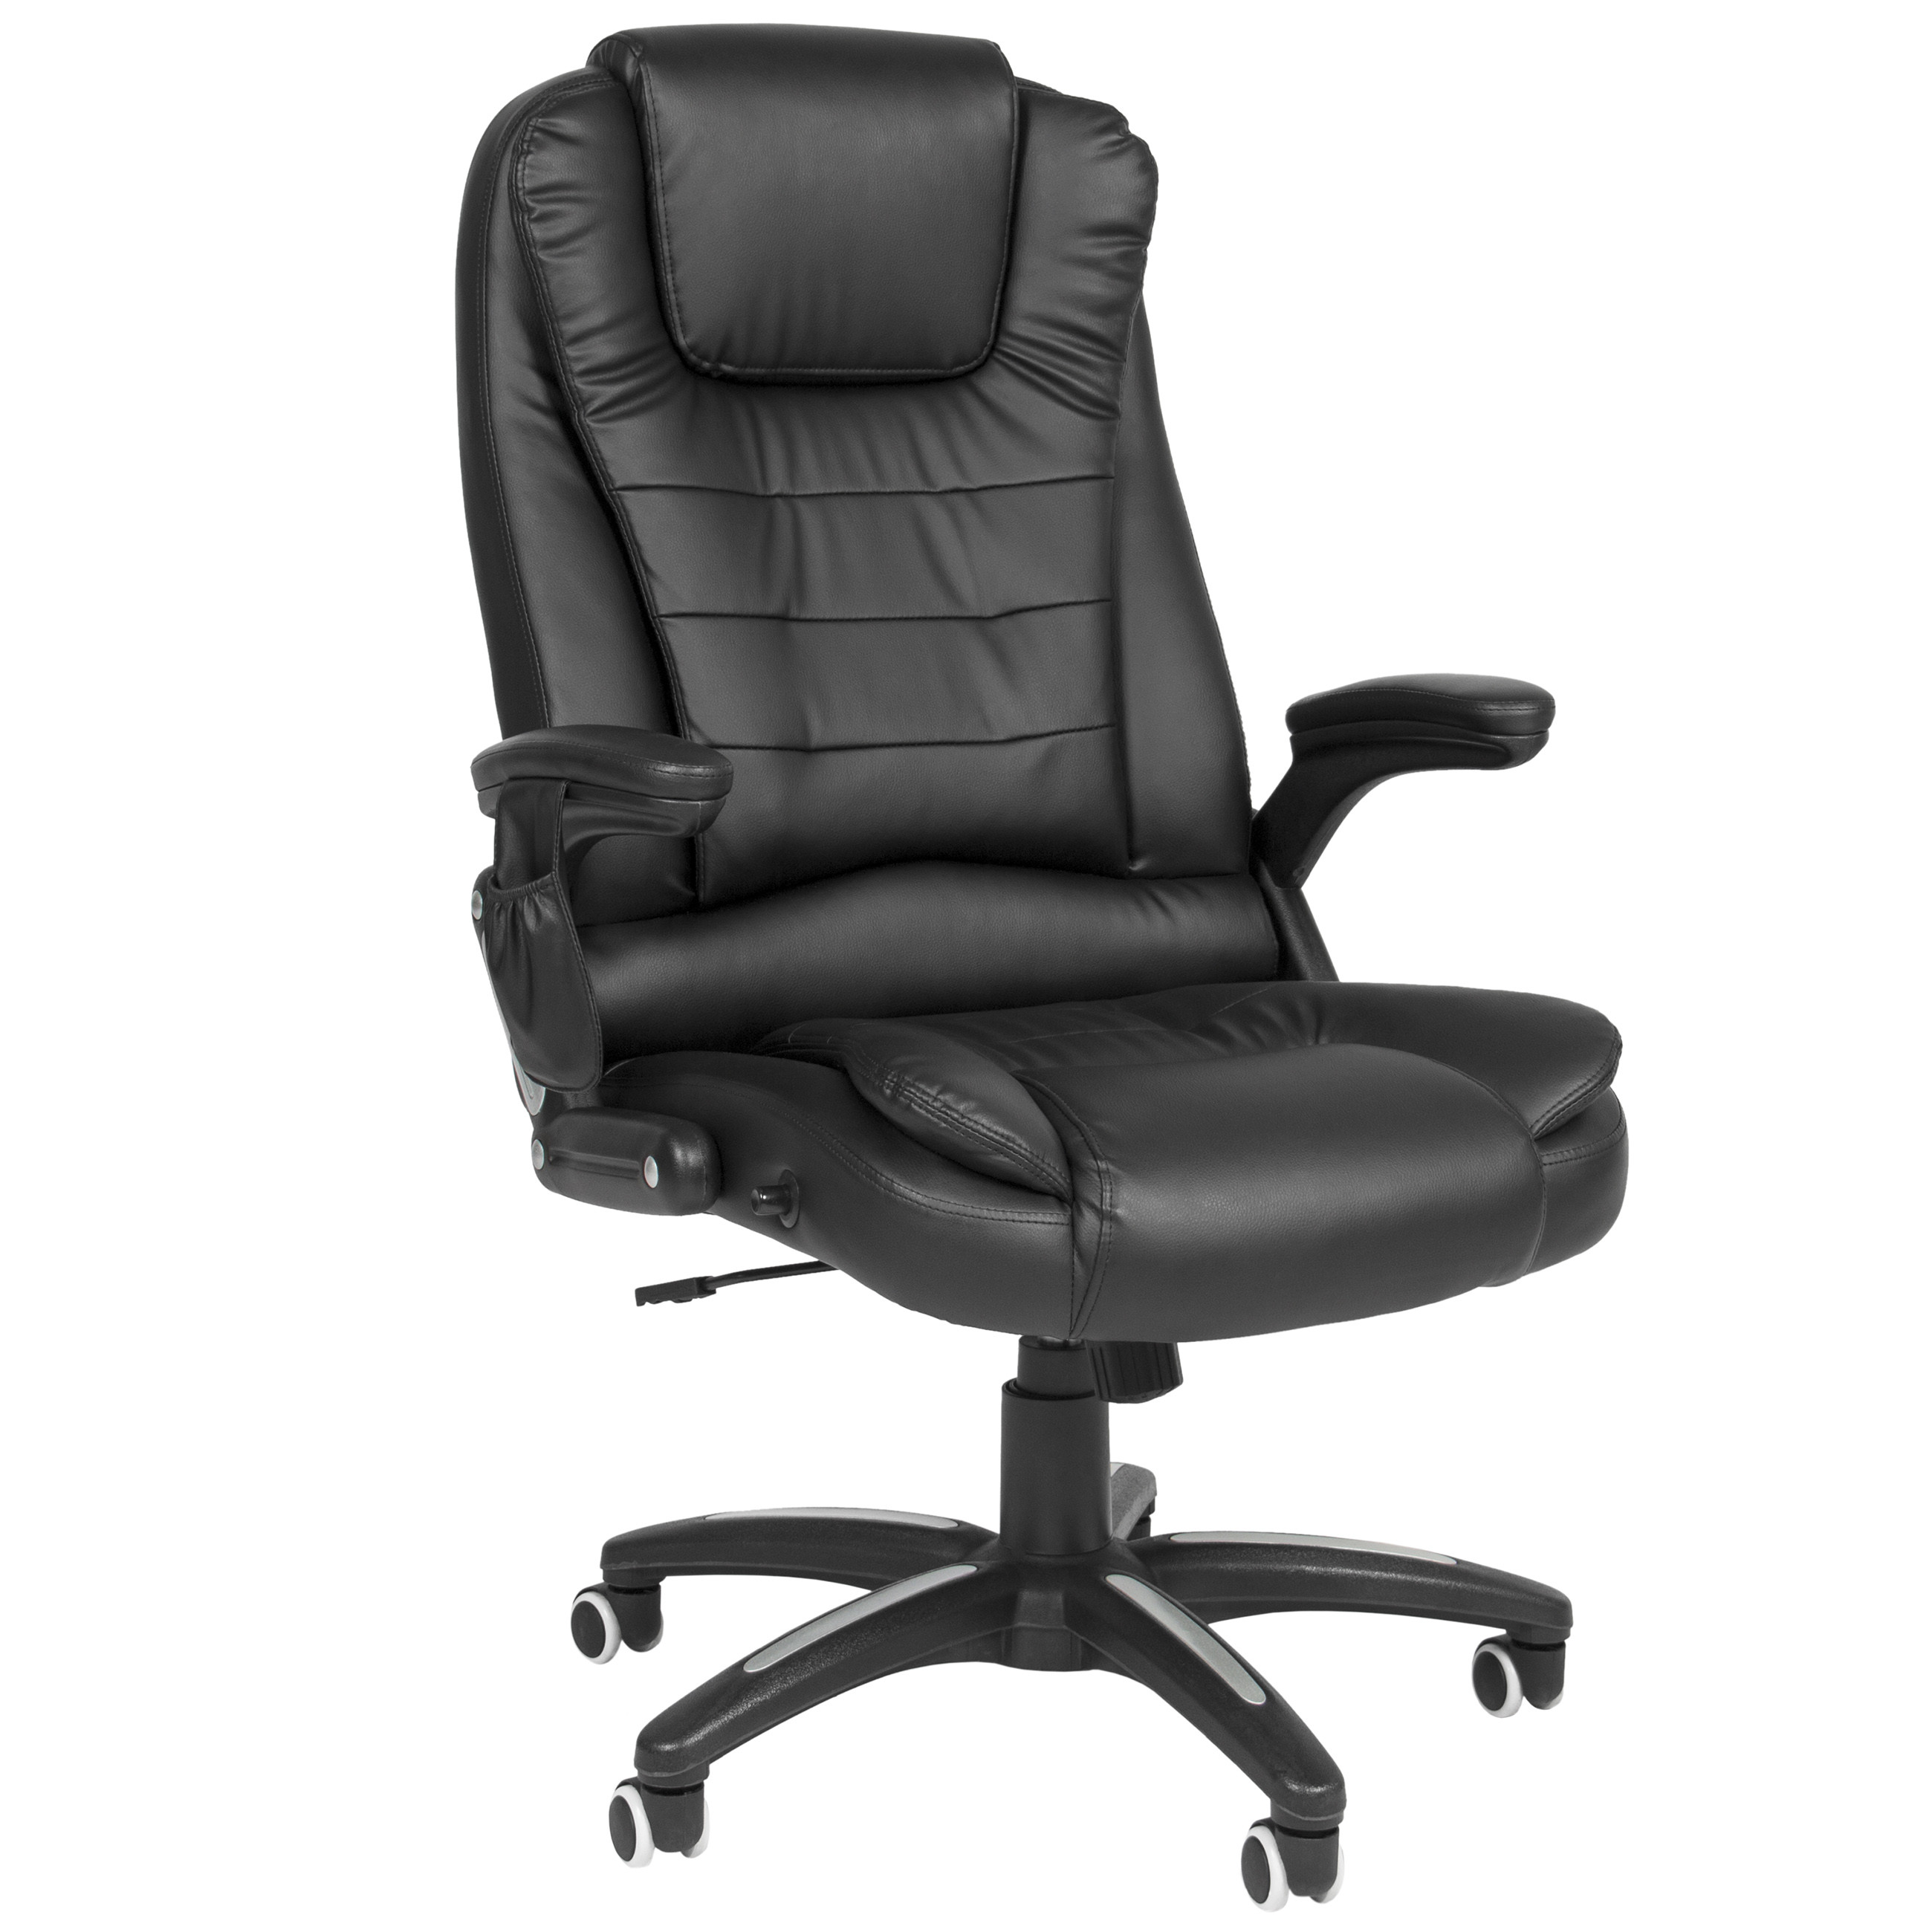 Top 20 Heated Office Chair - Best Collections Ever | Home Decor | DIY